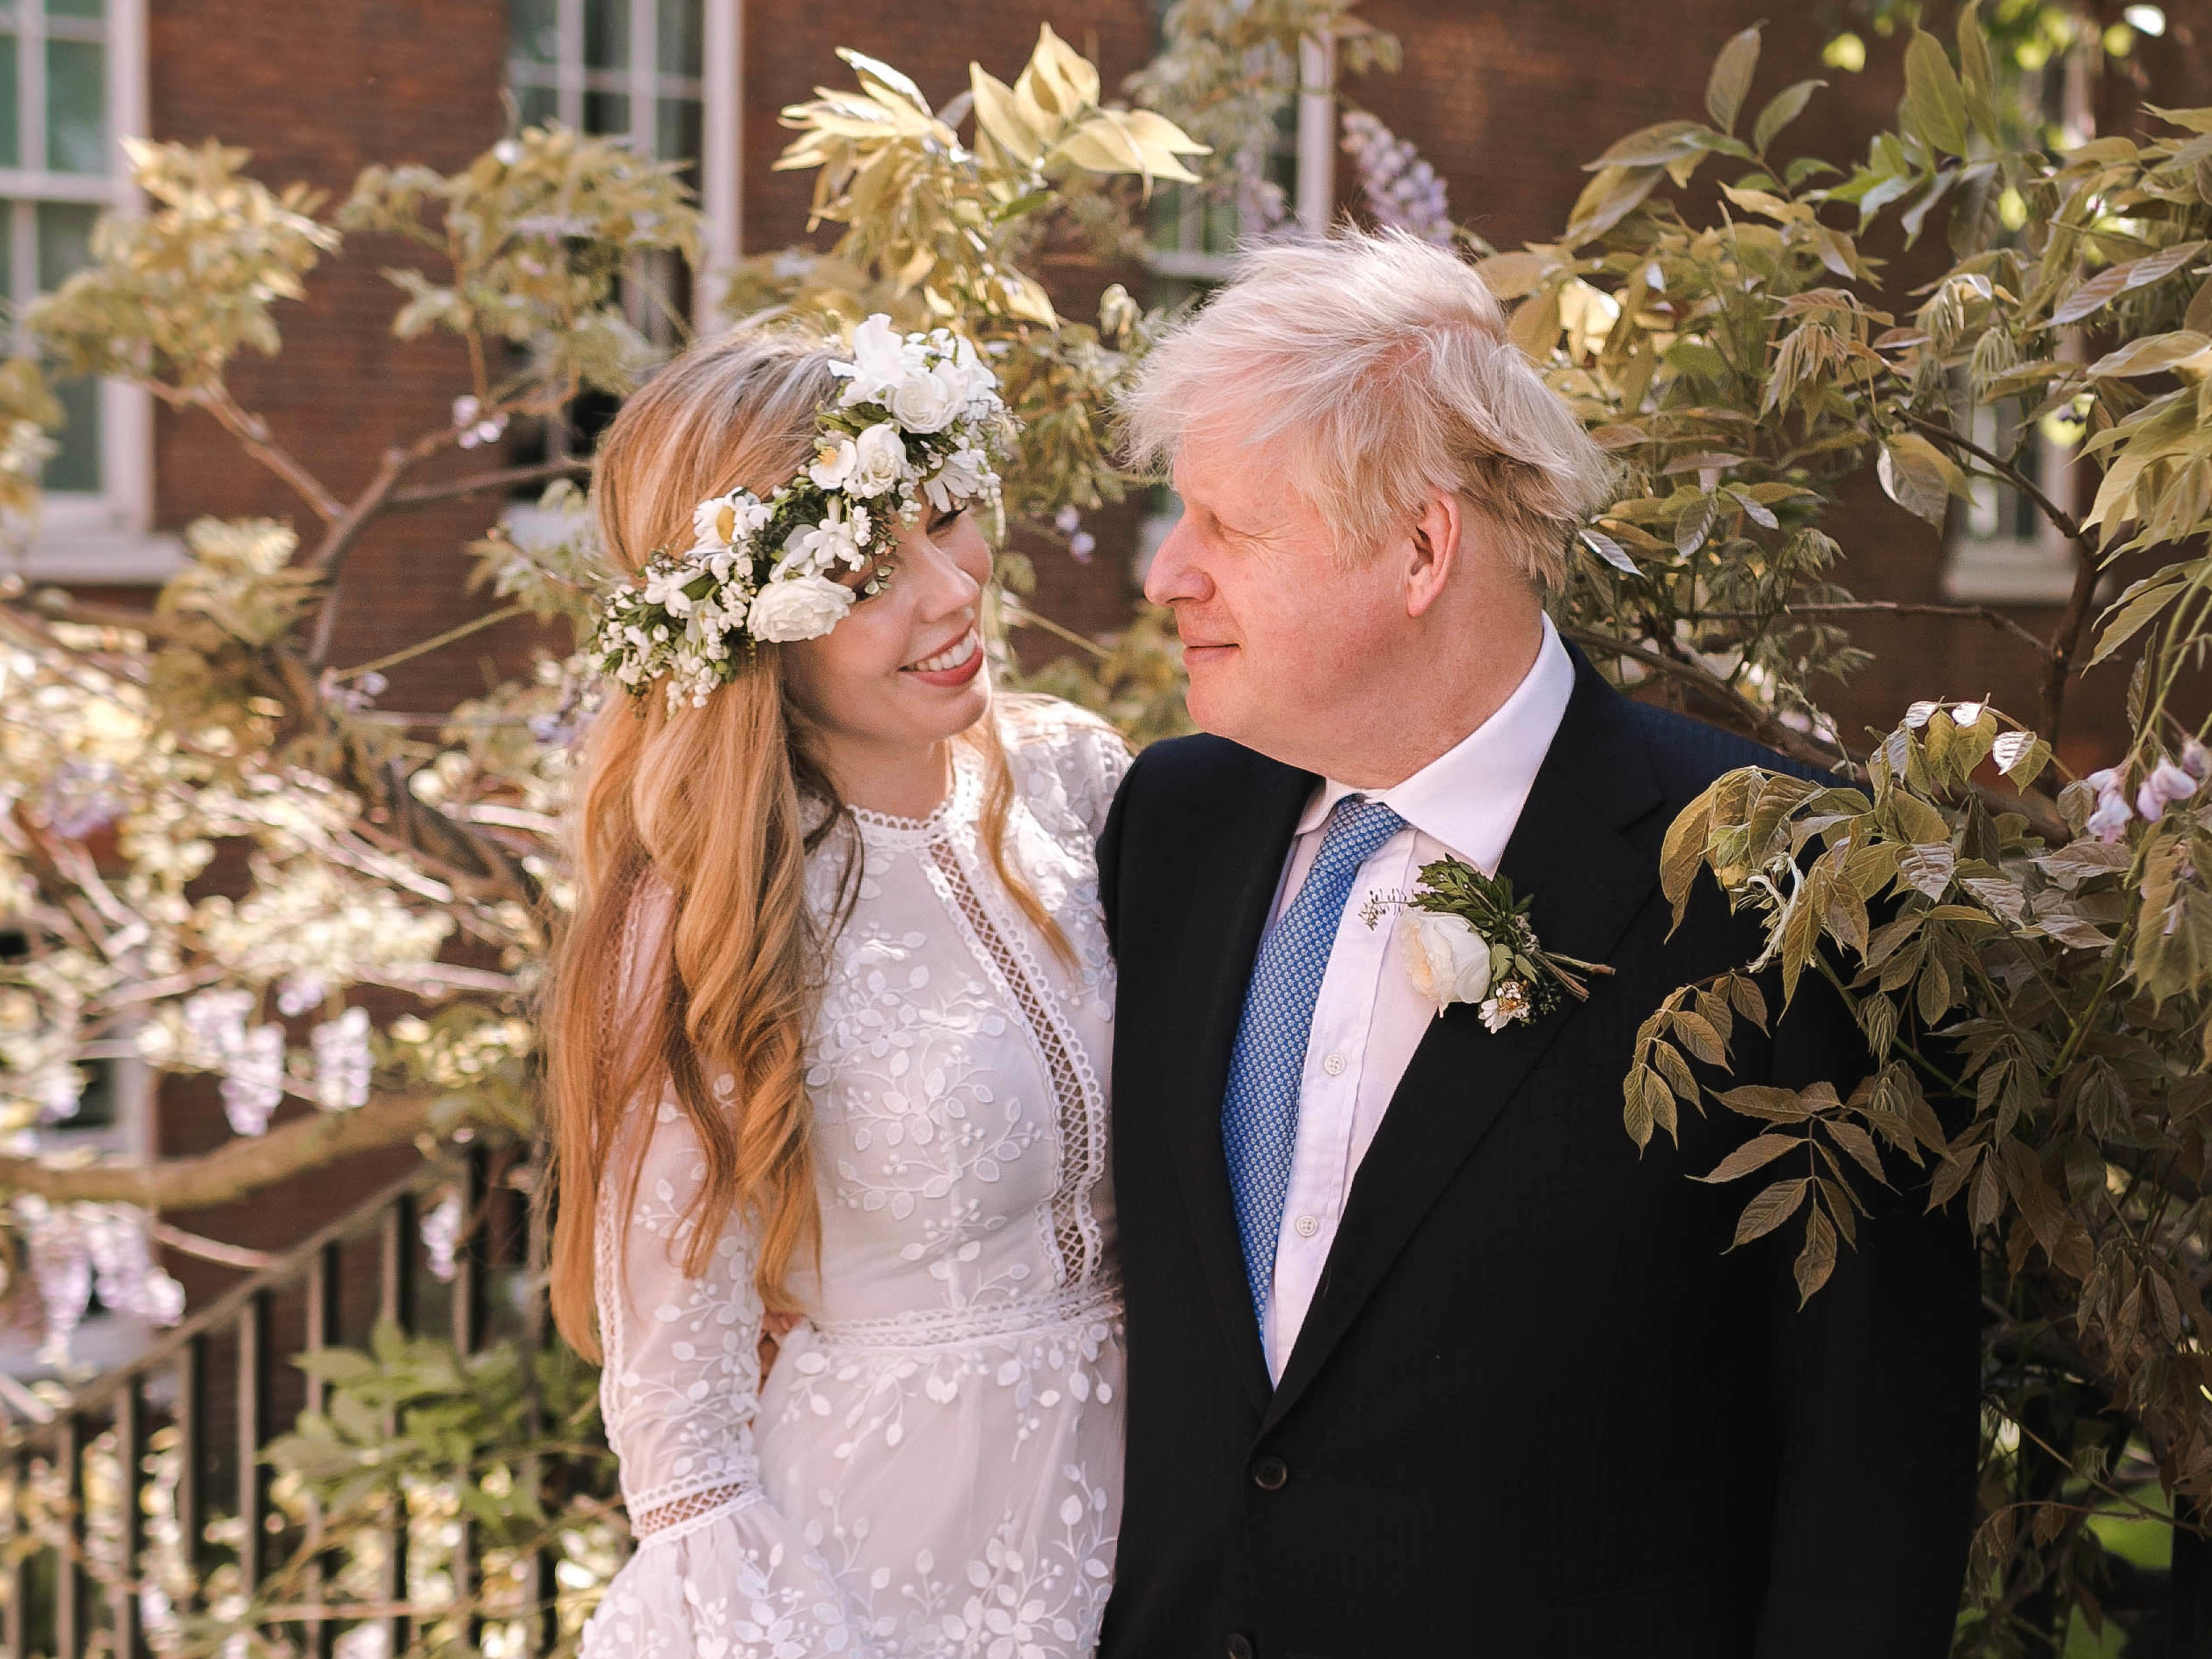 Boris Johnson Marries Fiancee Carrie Symonds In Private Wedding Wjct News